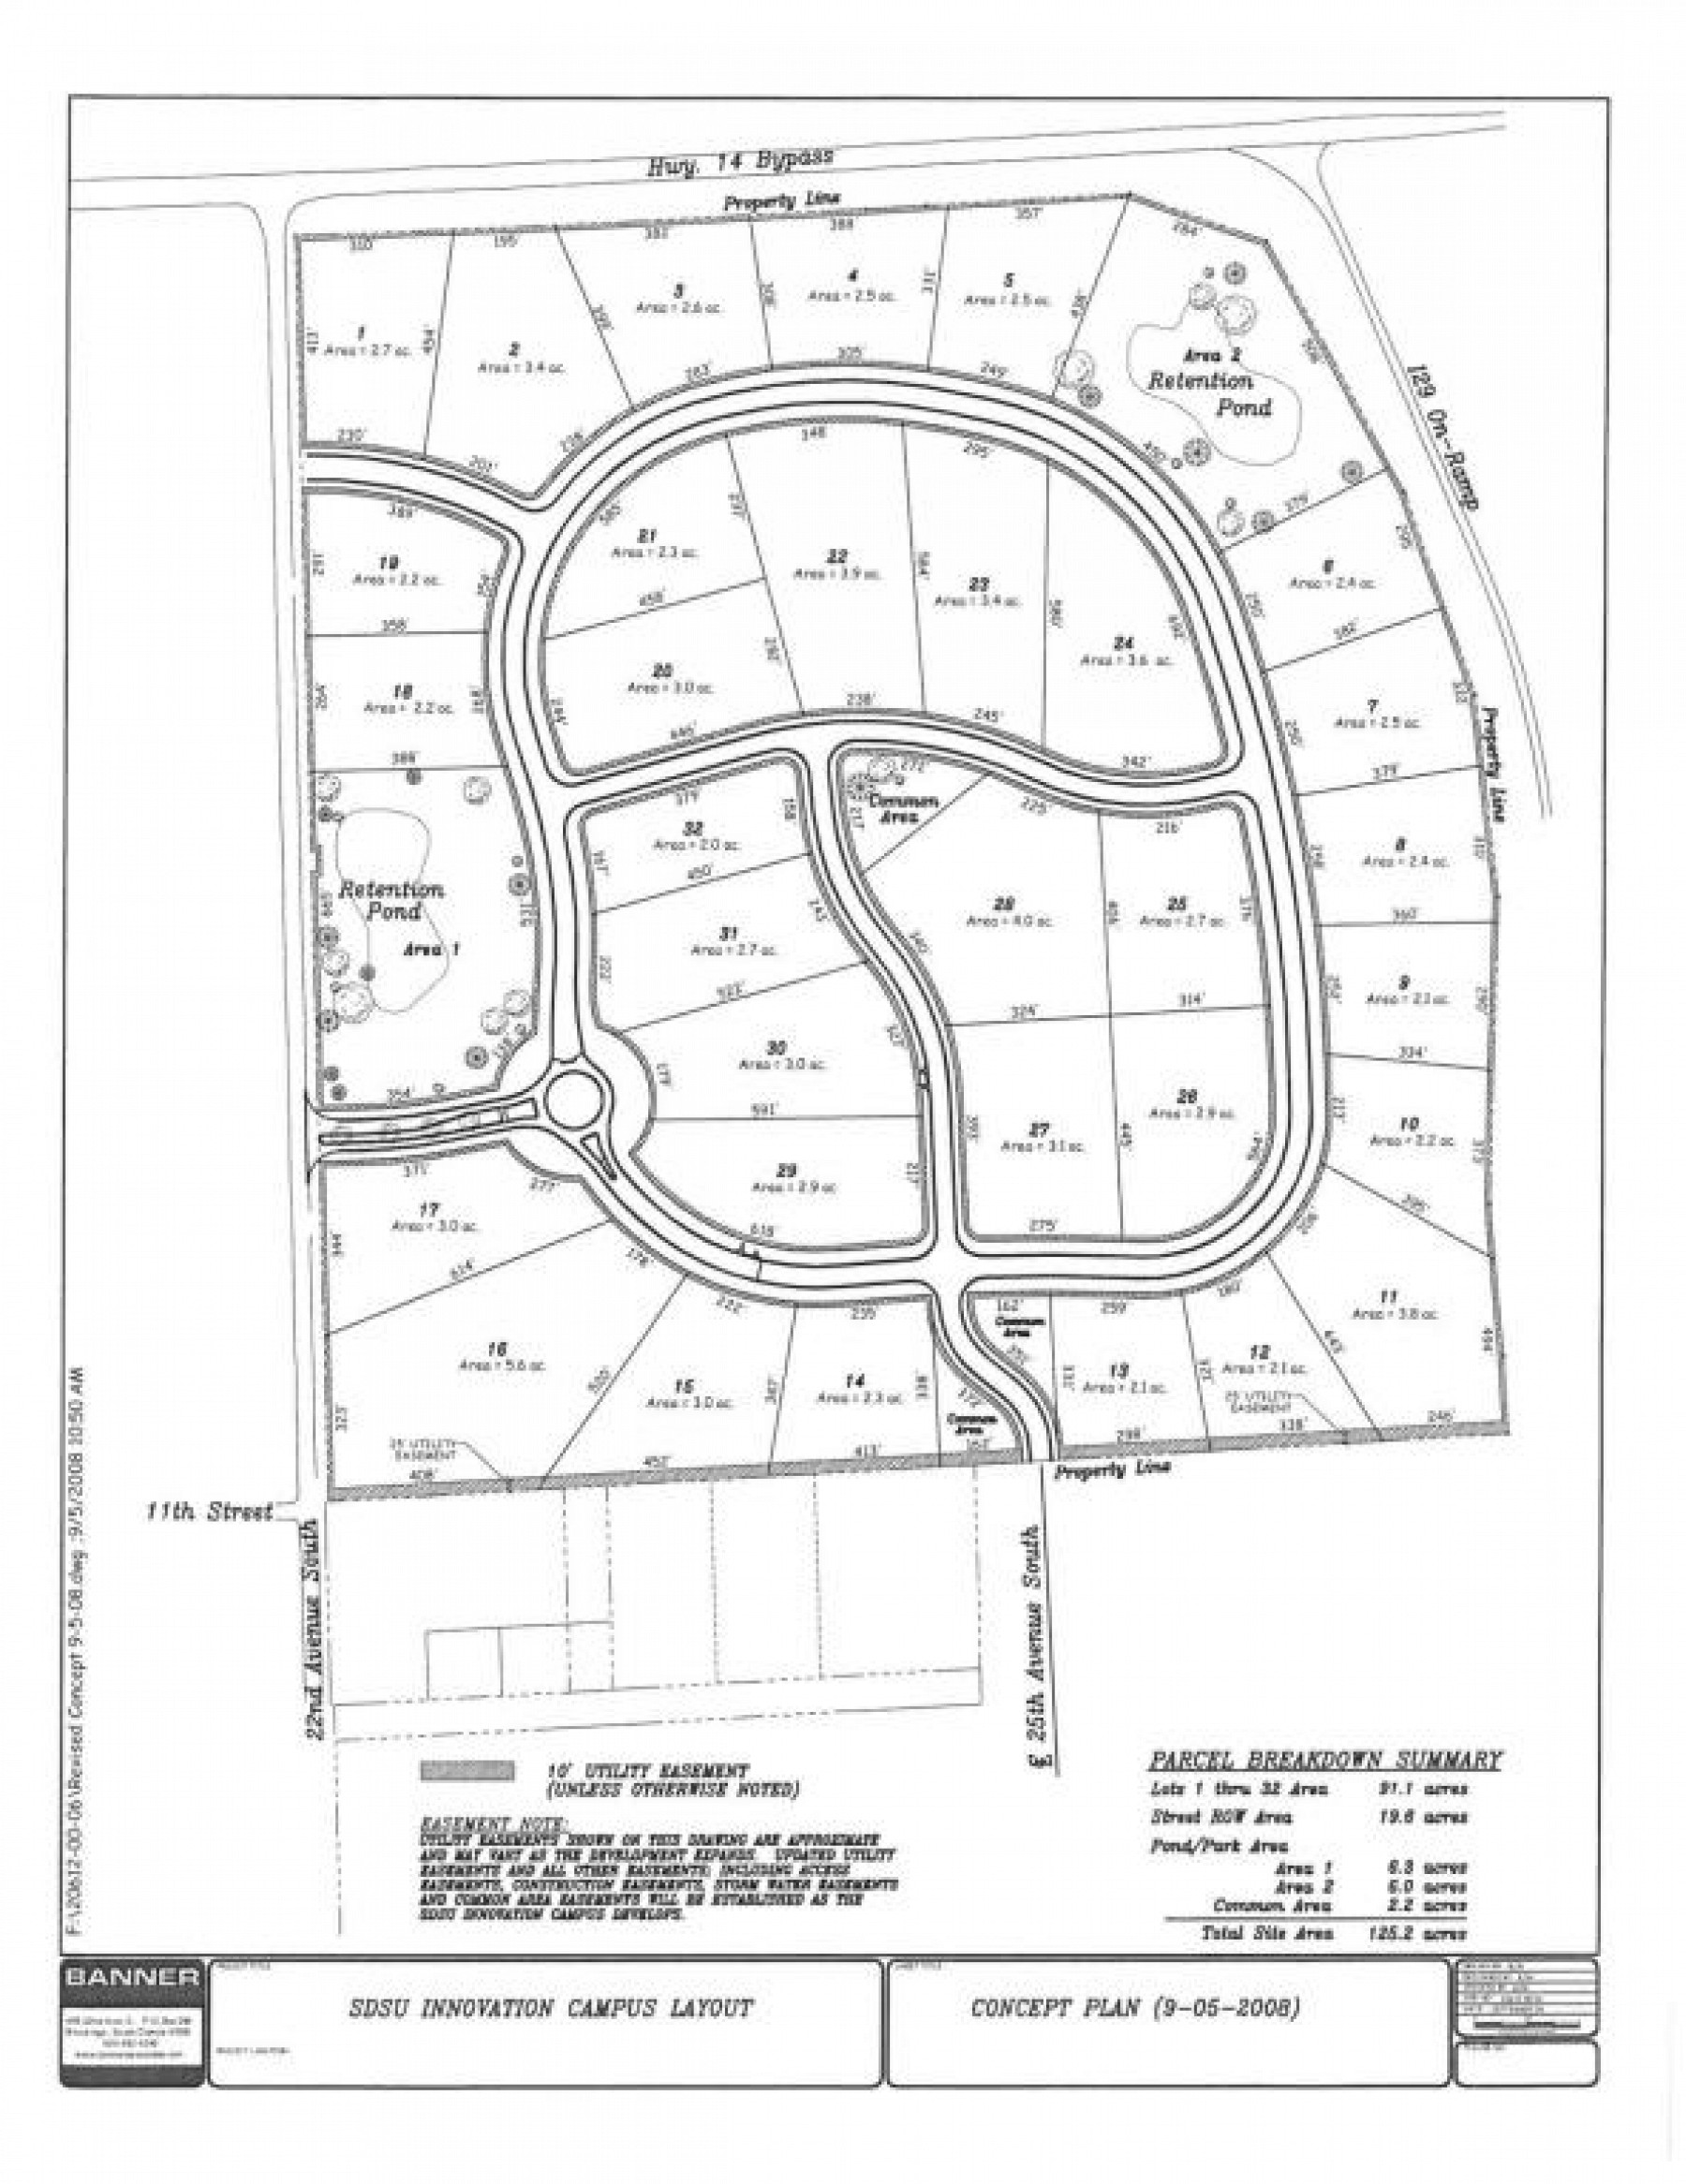 Lot 9 Innovation Campus, Brookings, SD 57006